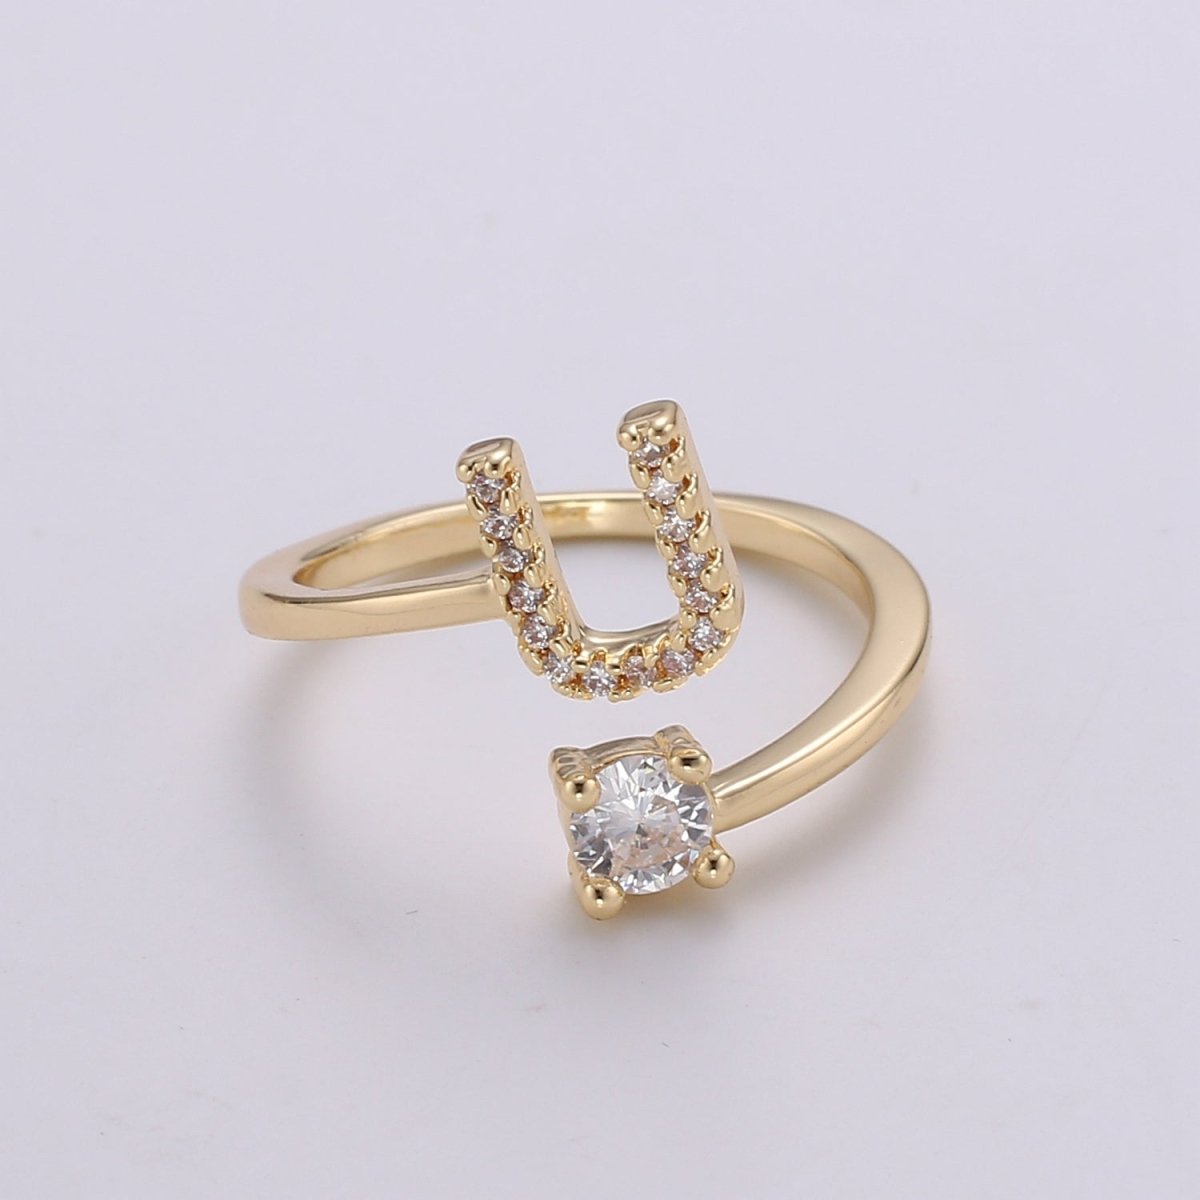 Dainty Initial Ring Gold Letter Ring Minimalist Wedding Ring Initial Name Ring Adjustable Initial Cz Ring Personalized Bridesmaid Gift R-370 - DLUXCA